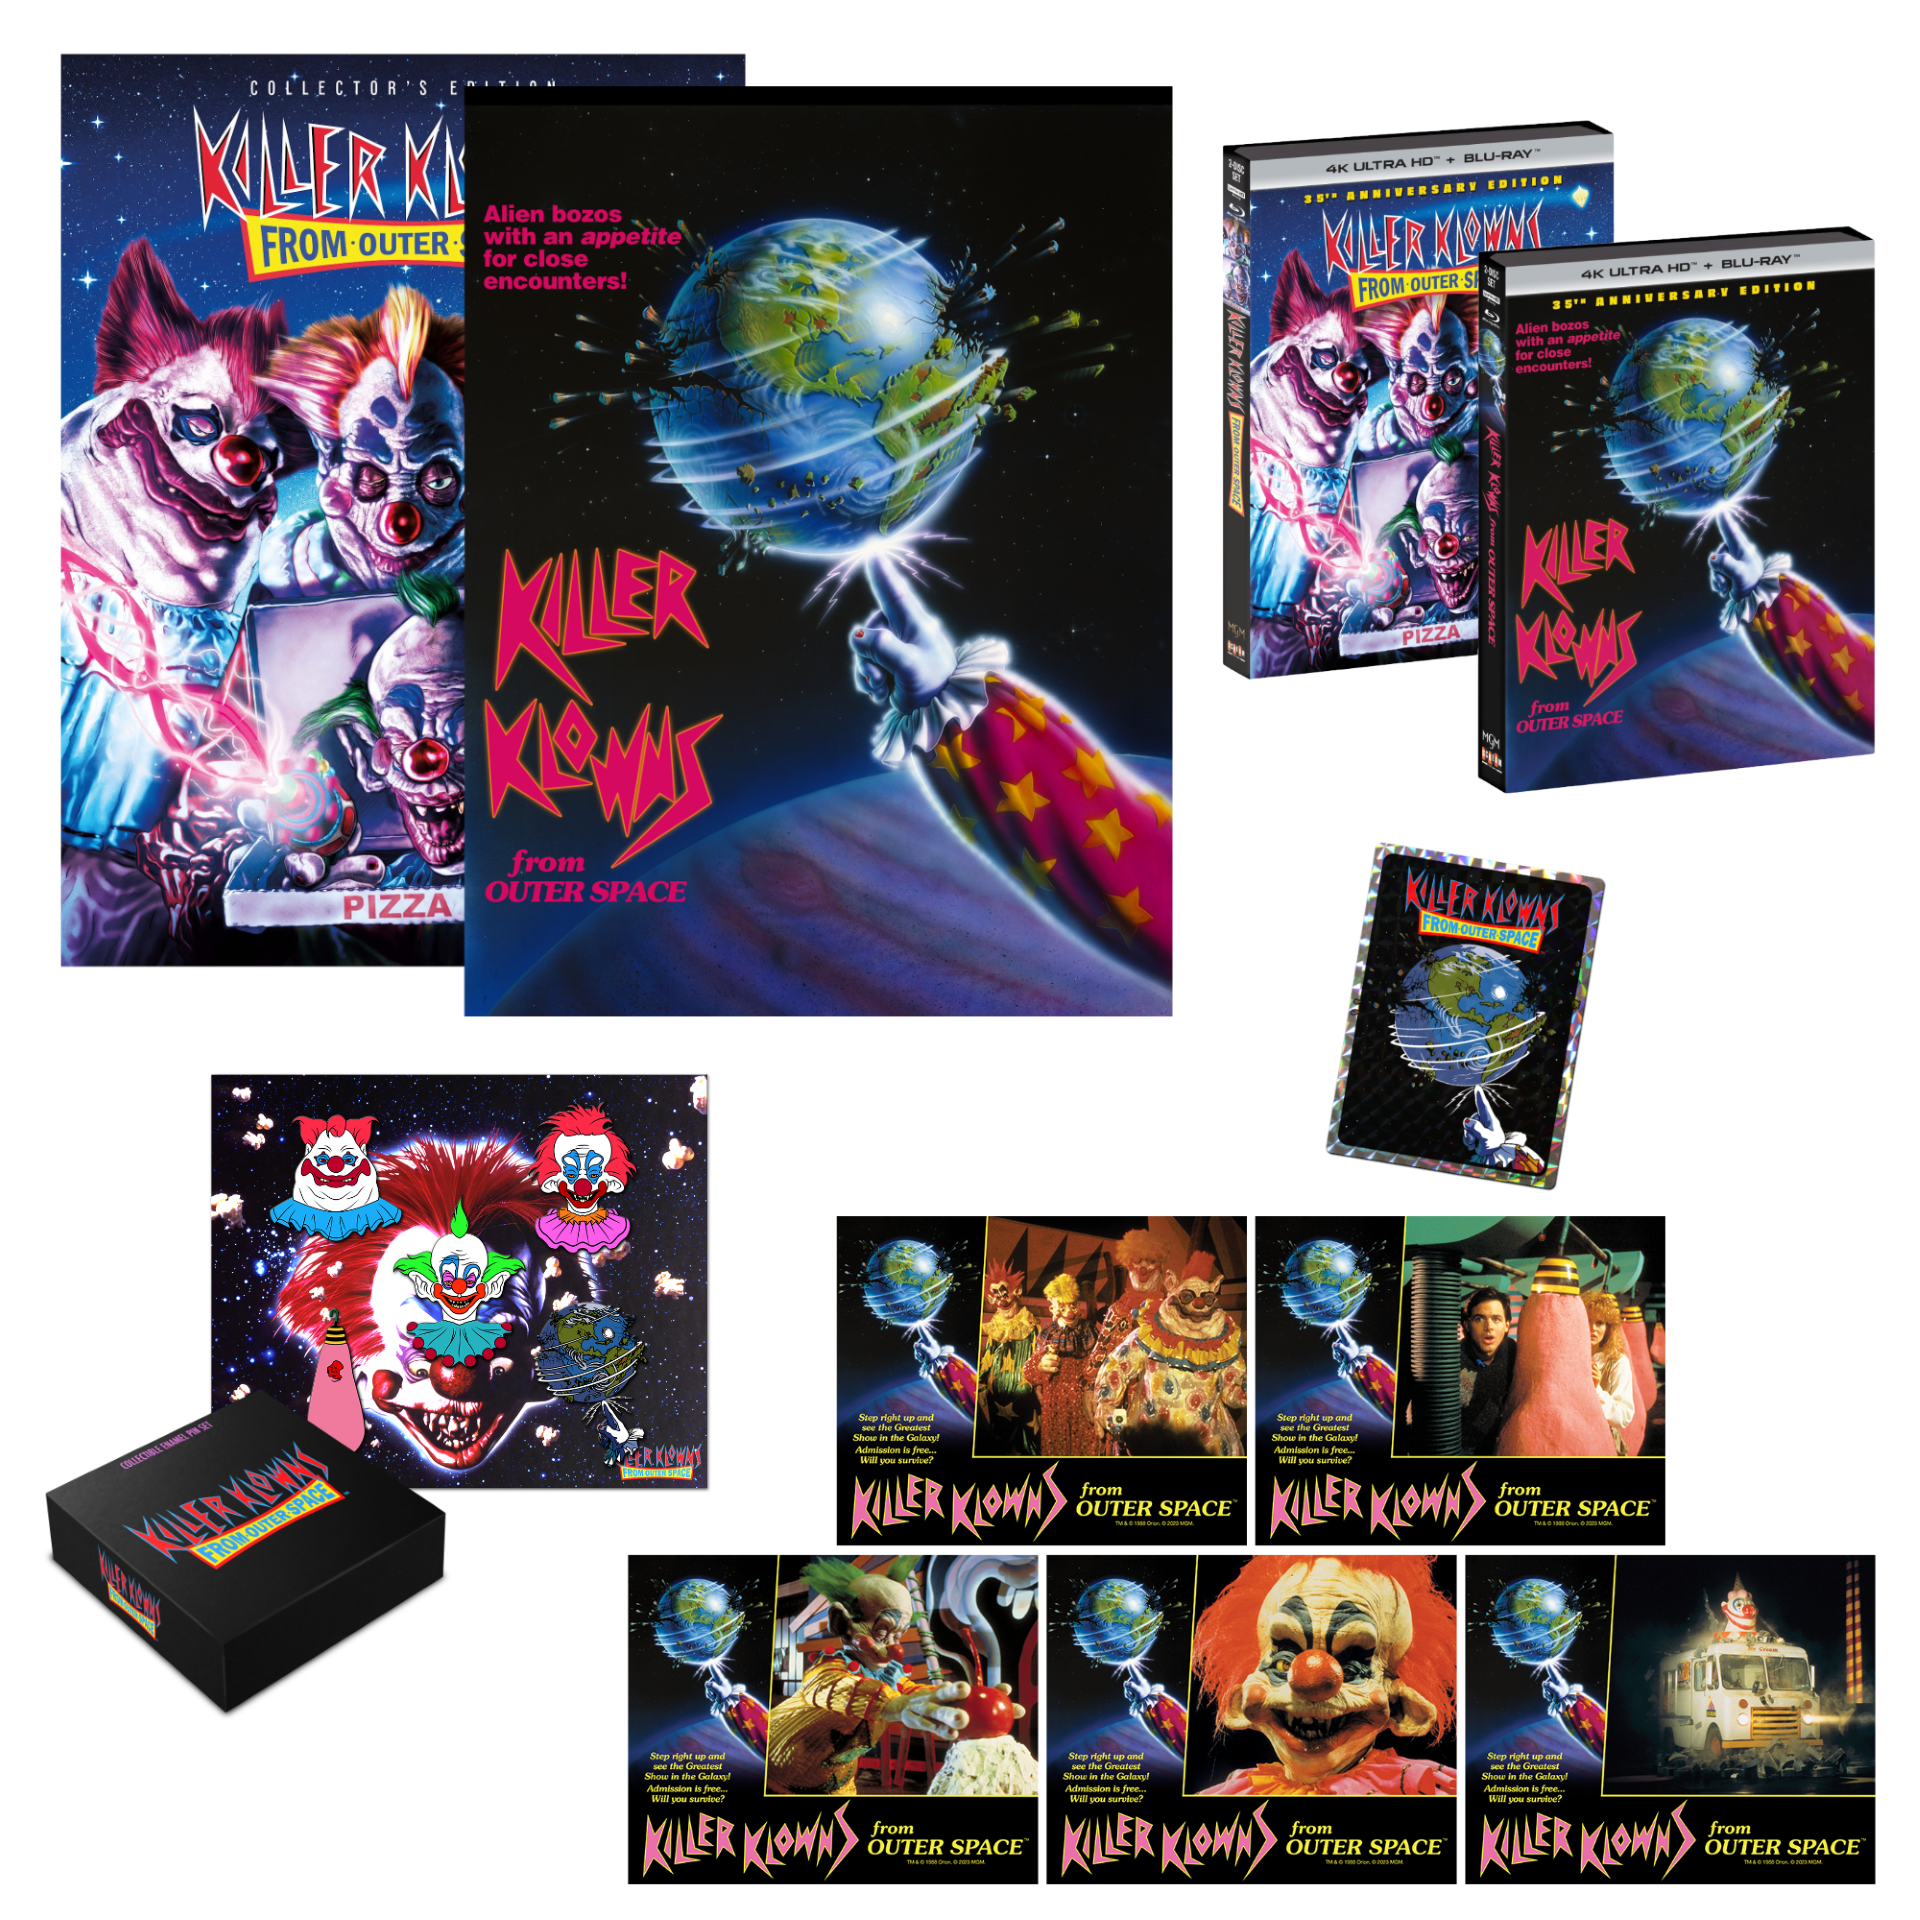 Killer Klowns From Outer Space [35th Anniversary Edition] + Exclusive Slipcover + 2 Exclusive Posters + Prism Sticker + Enamel Pins + Lobby Cards - Shout! Factory